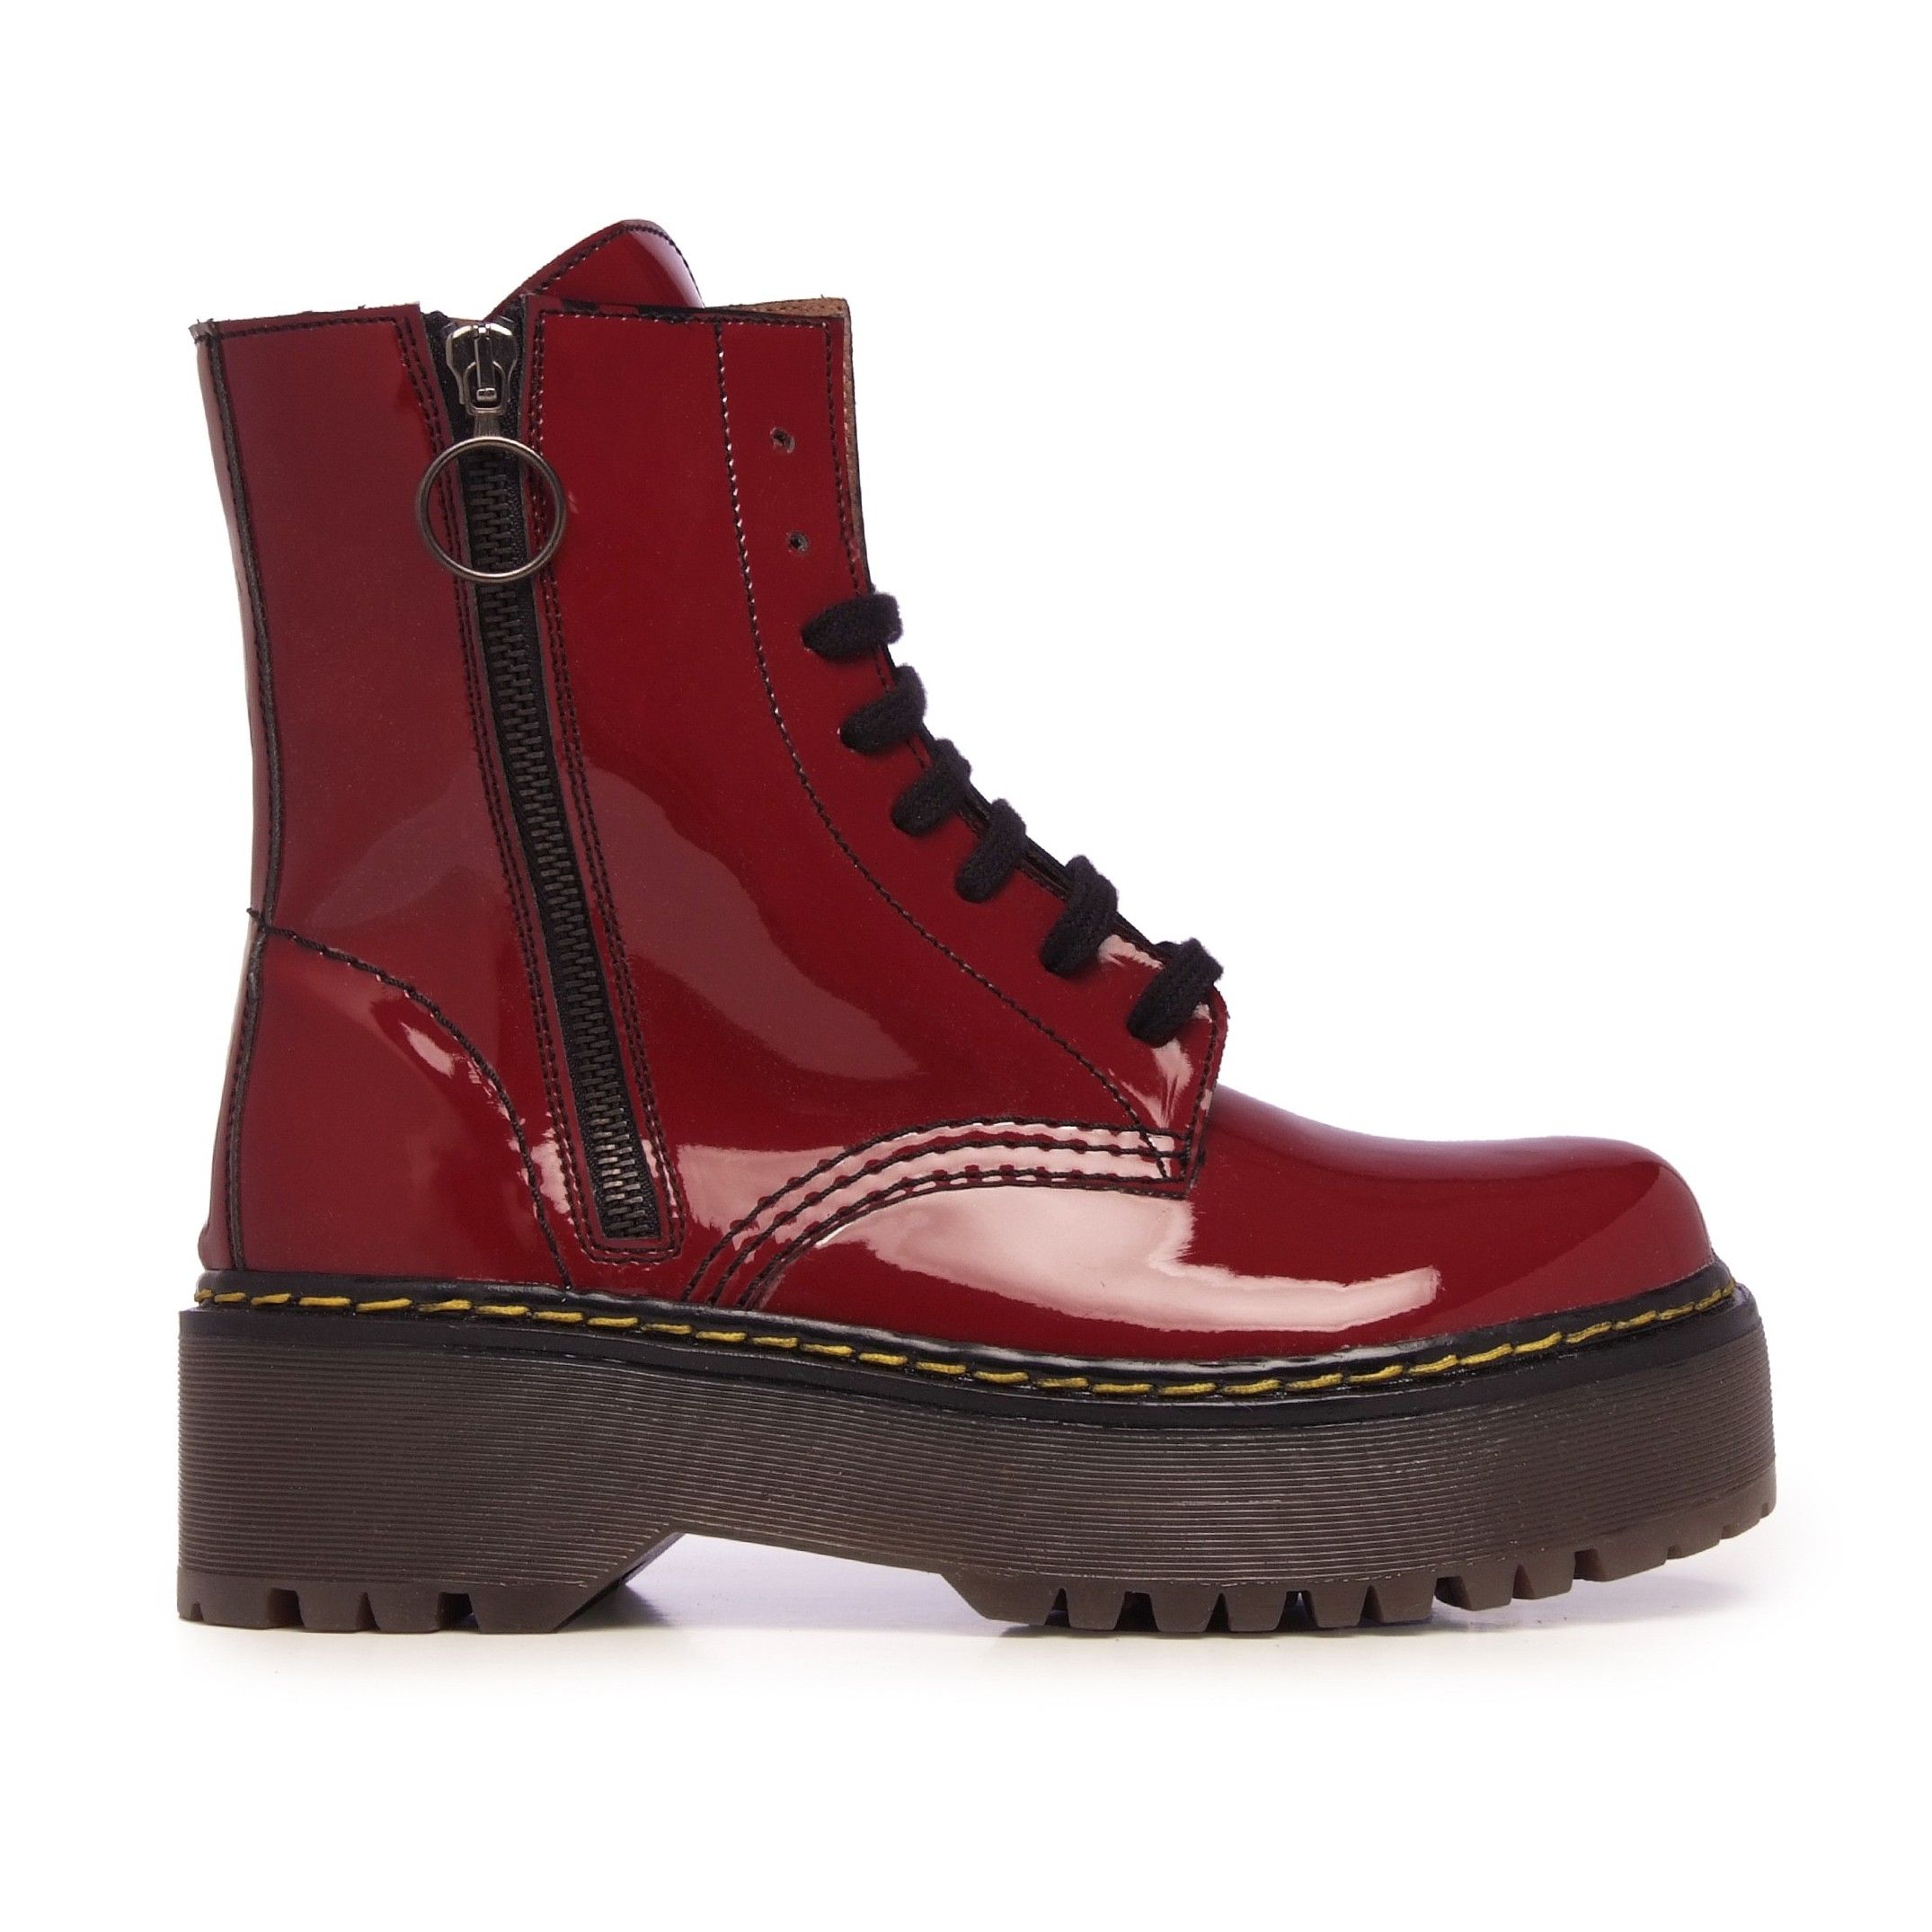 Patent leather boots for women. Laces and zipper closure. Platform: 3 cm. Heel: 5 cm. Made in Spain.